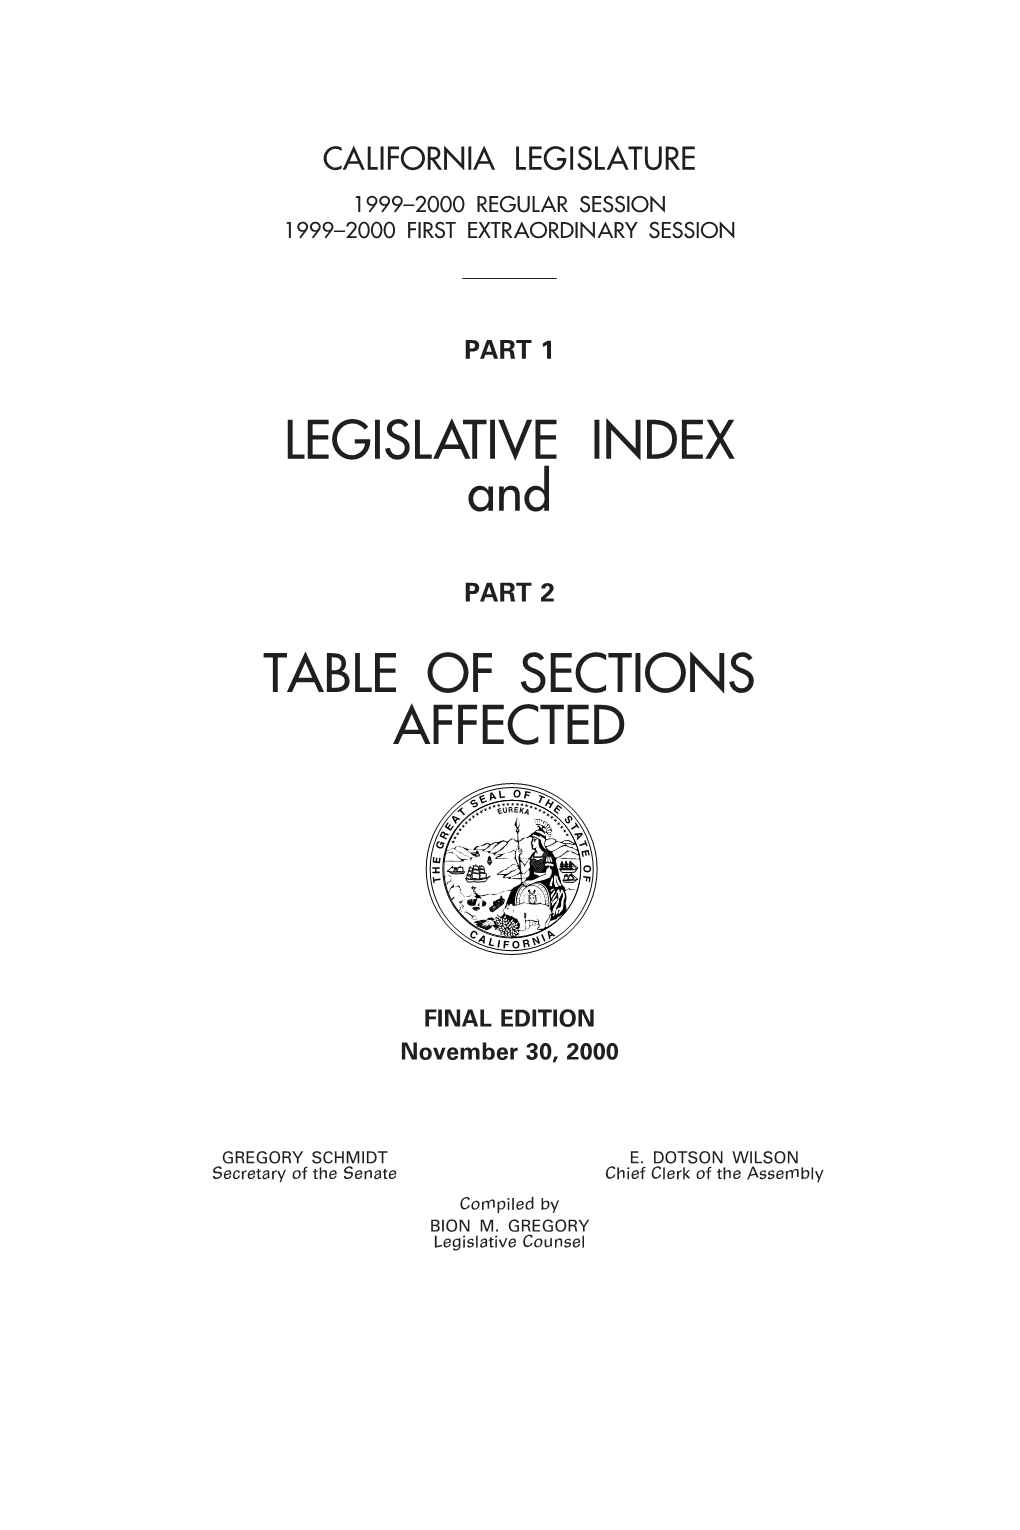 LEGISLATIVE INDEX and TABLE of SECTIONS AFFECTED